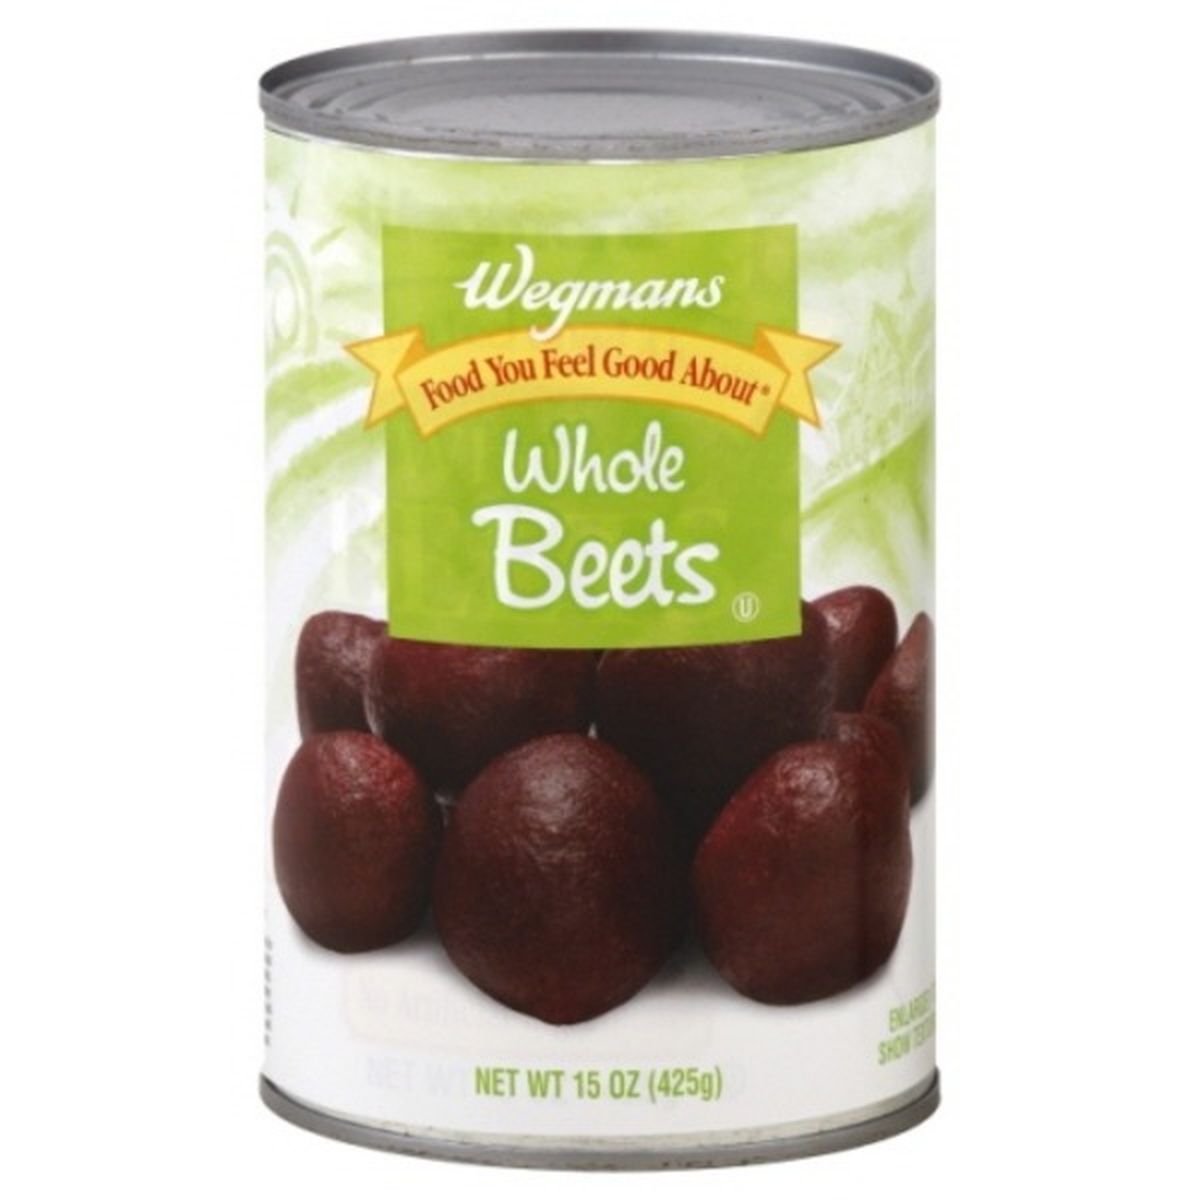 Calories in Wegmans Whole Beets